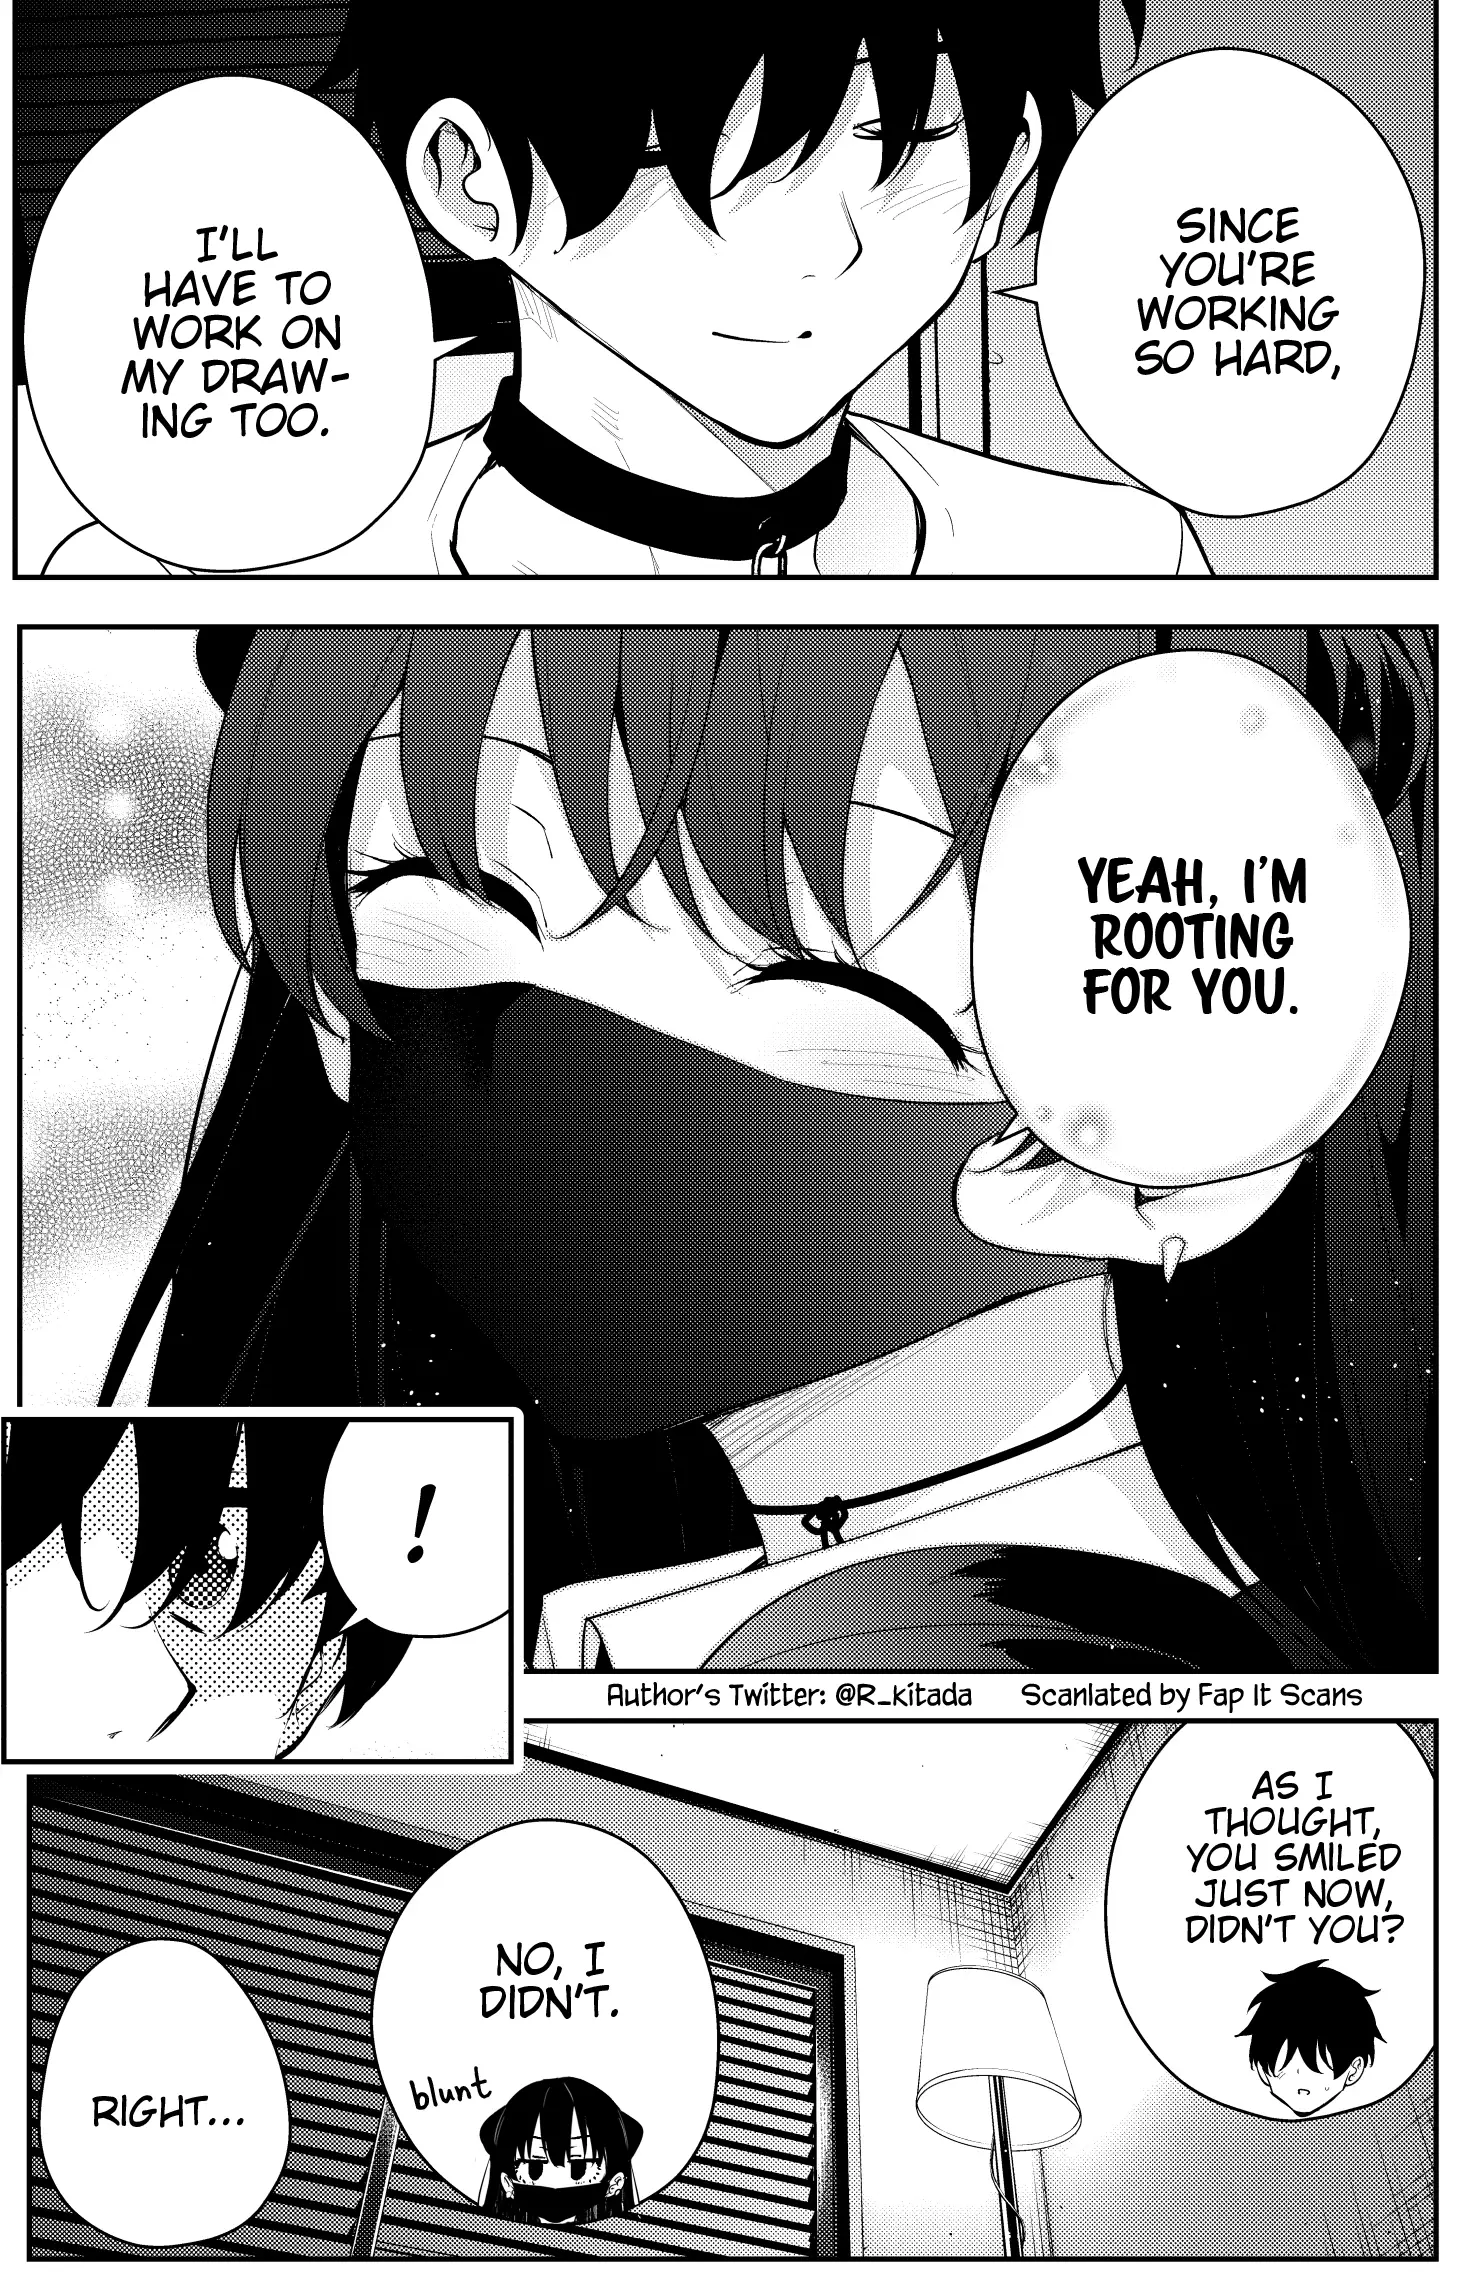 The Story Of A Manga Artist Confined By A Strange High School Girl - 12 page 4-485a9c30